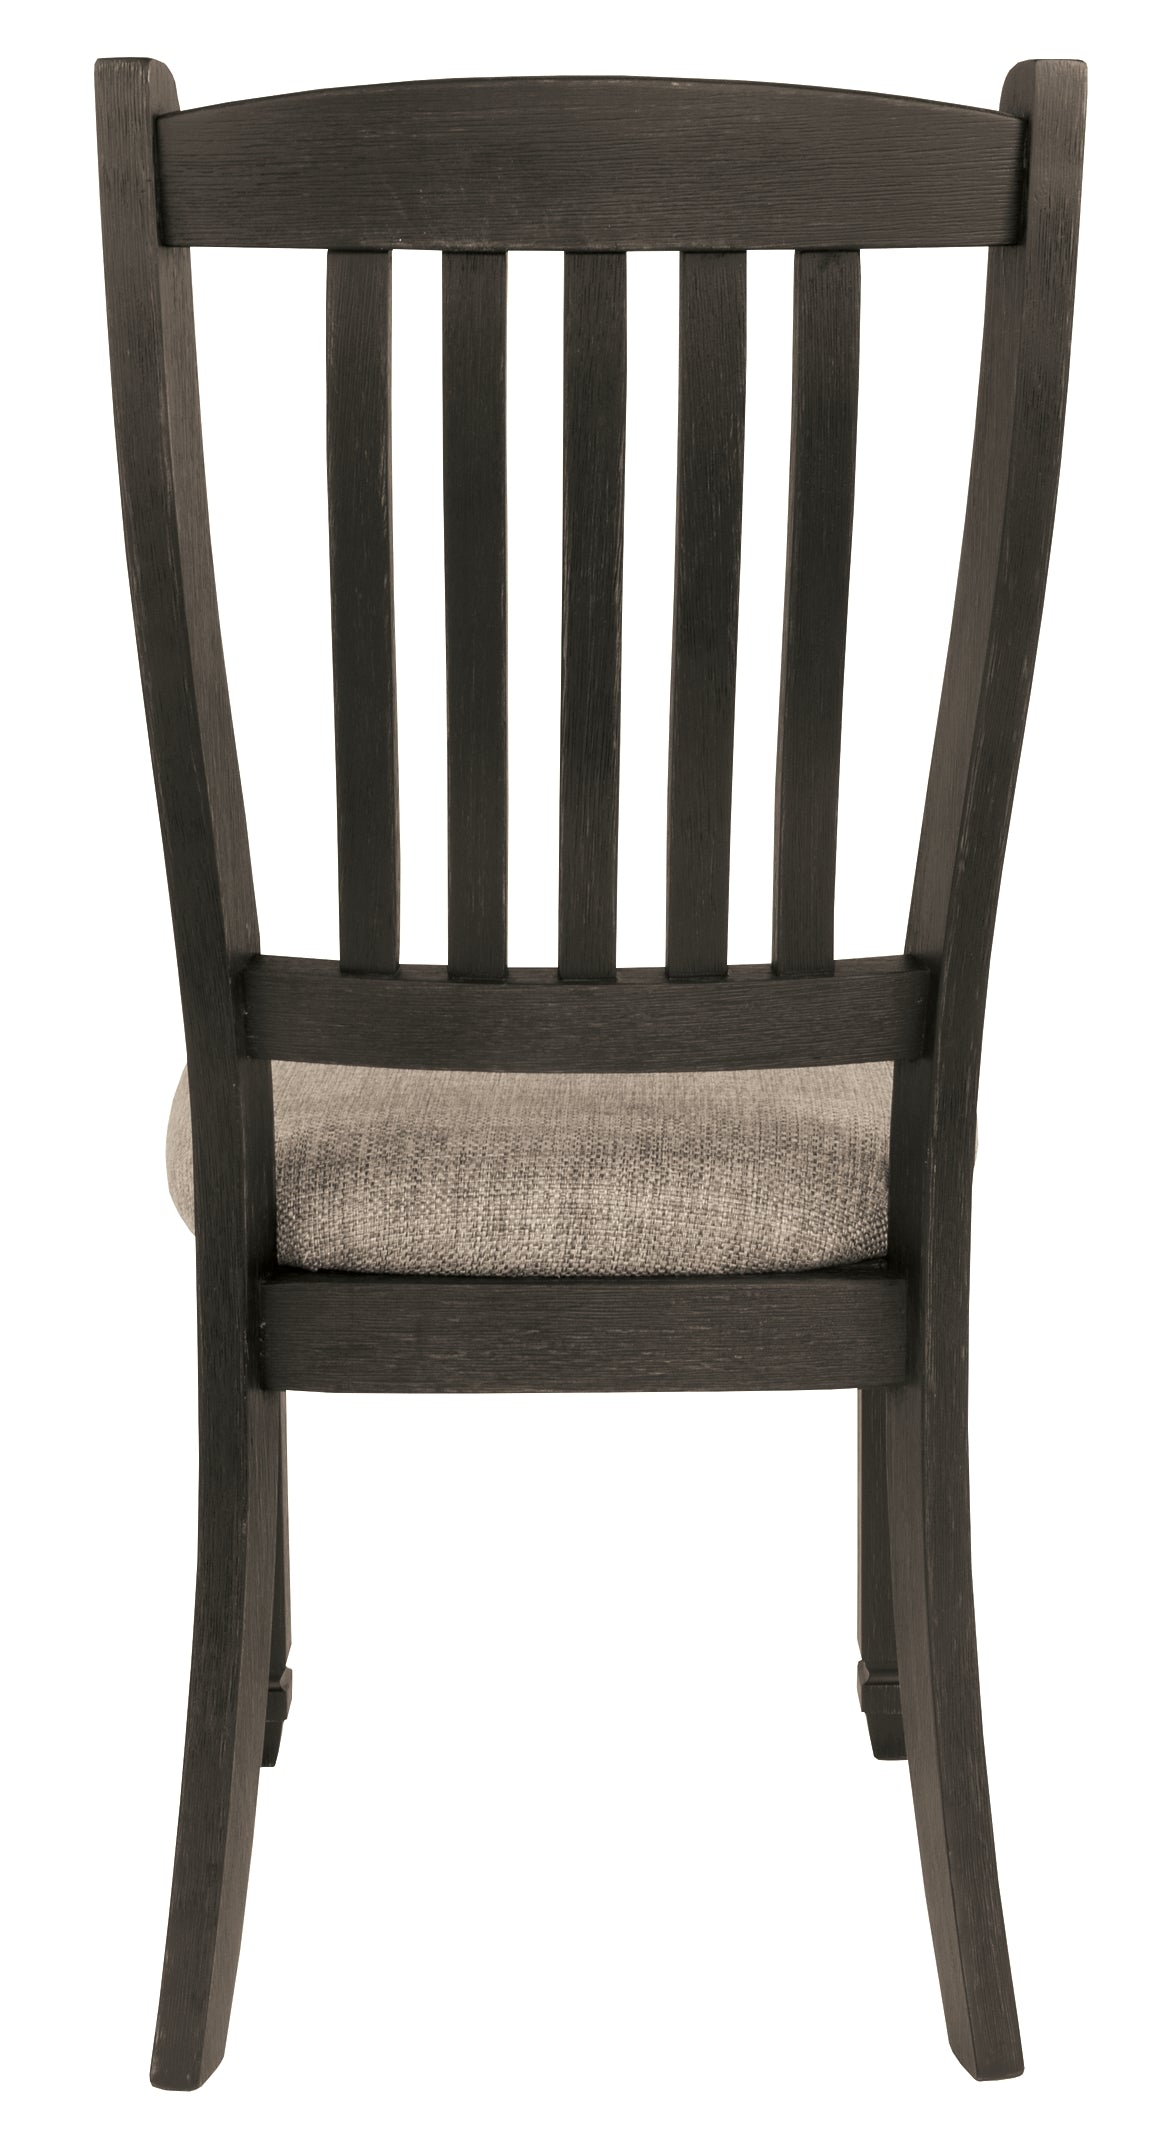 Tyler Creek Dining Chair (Set of 2)